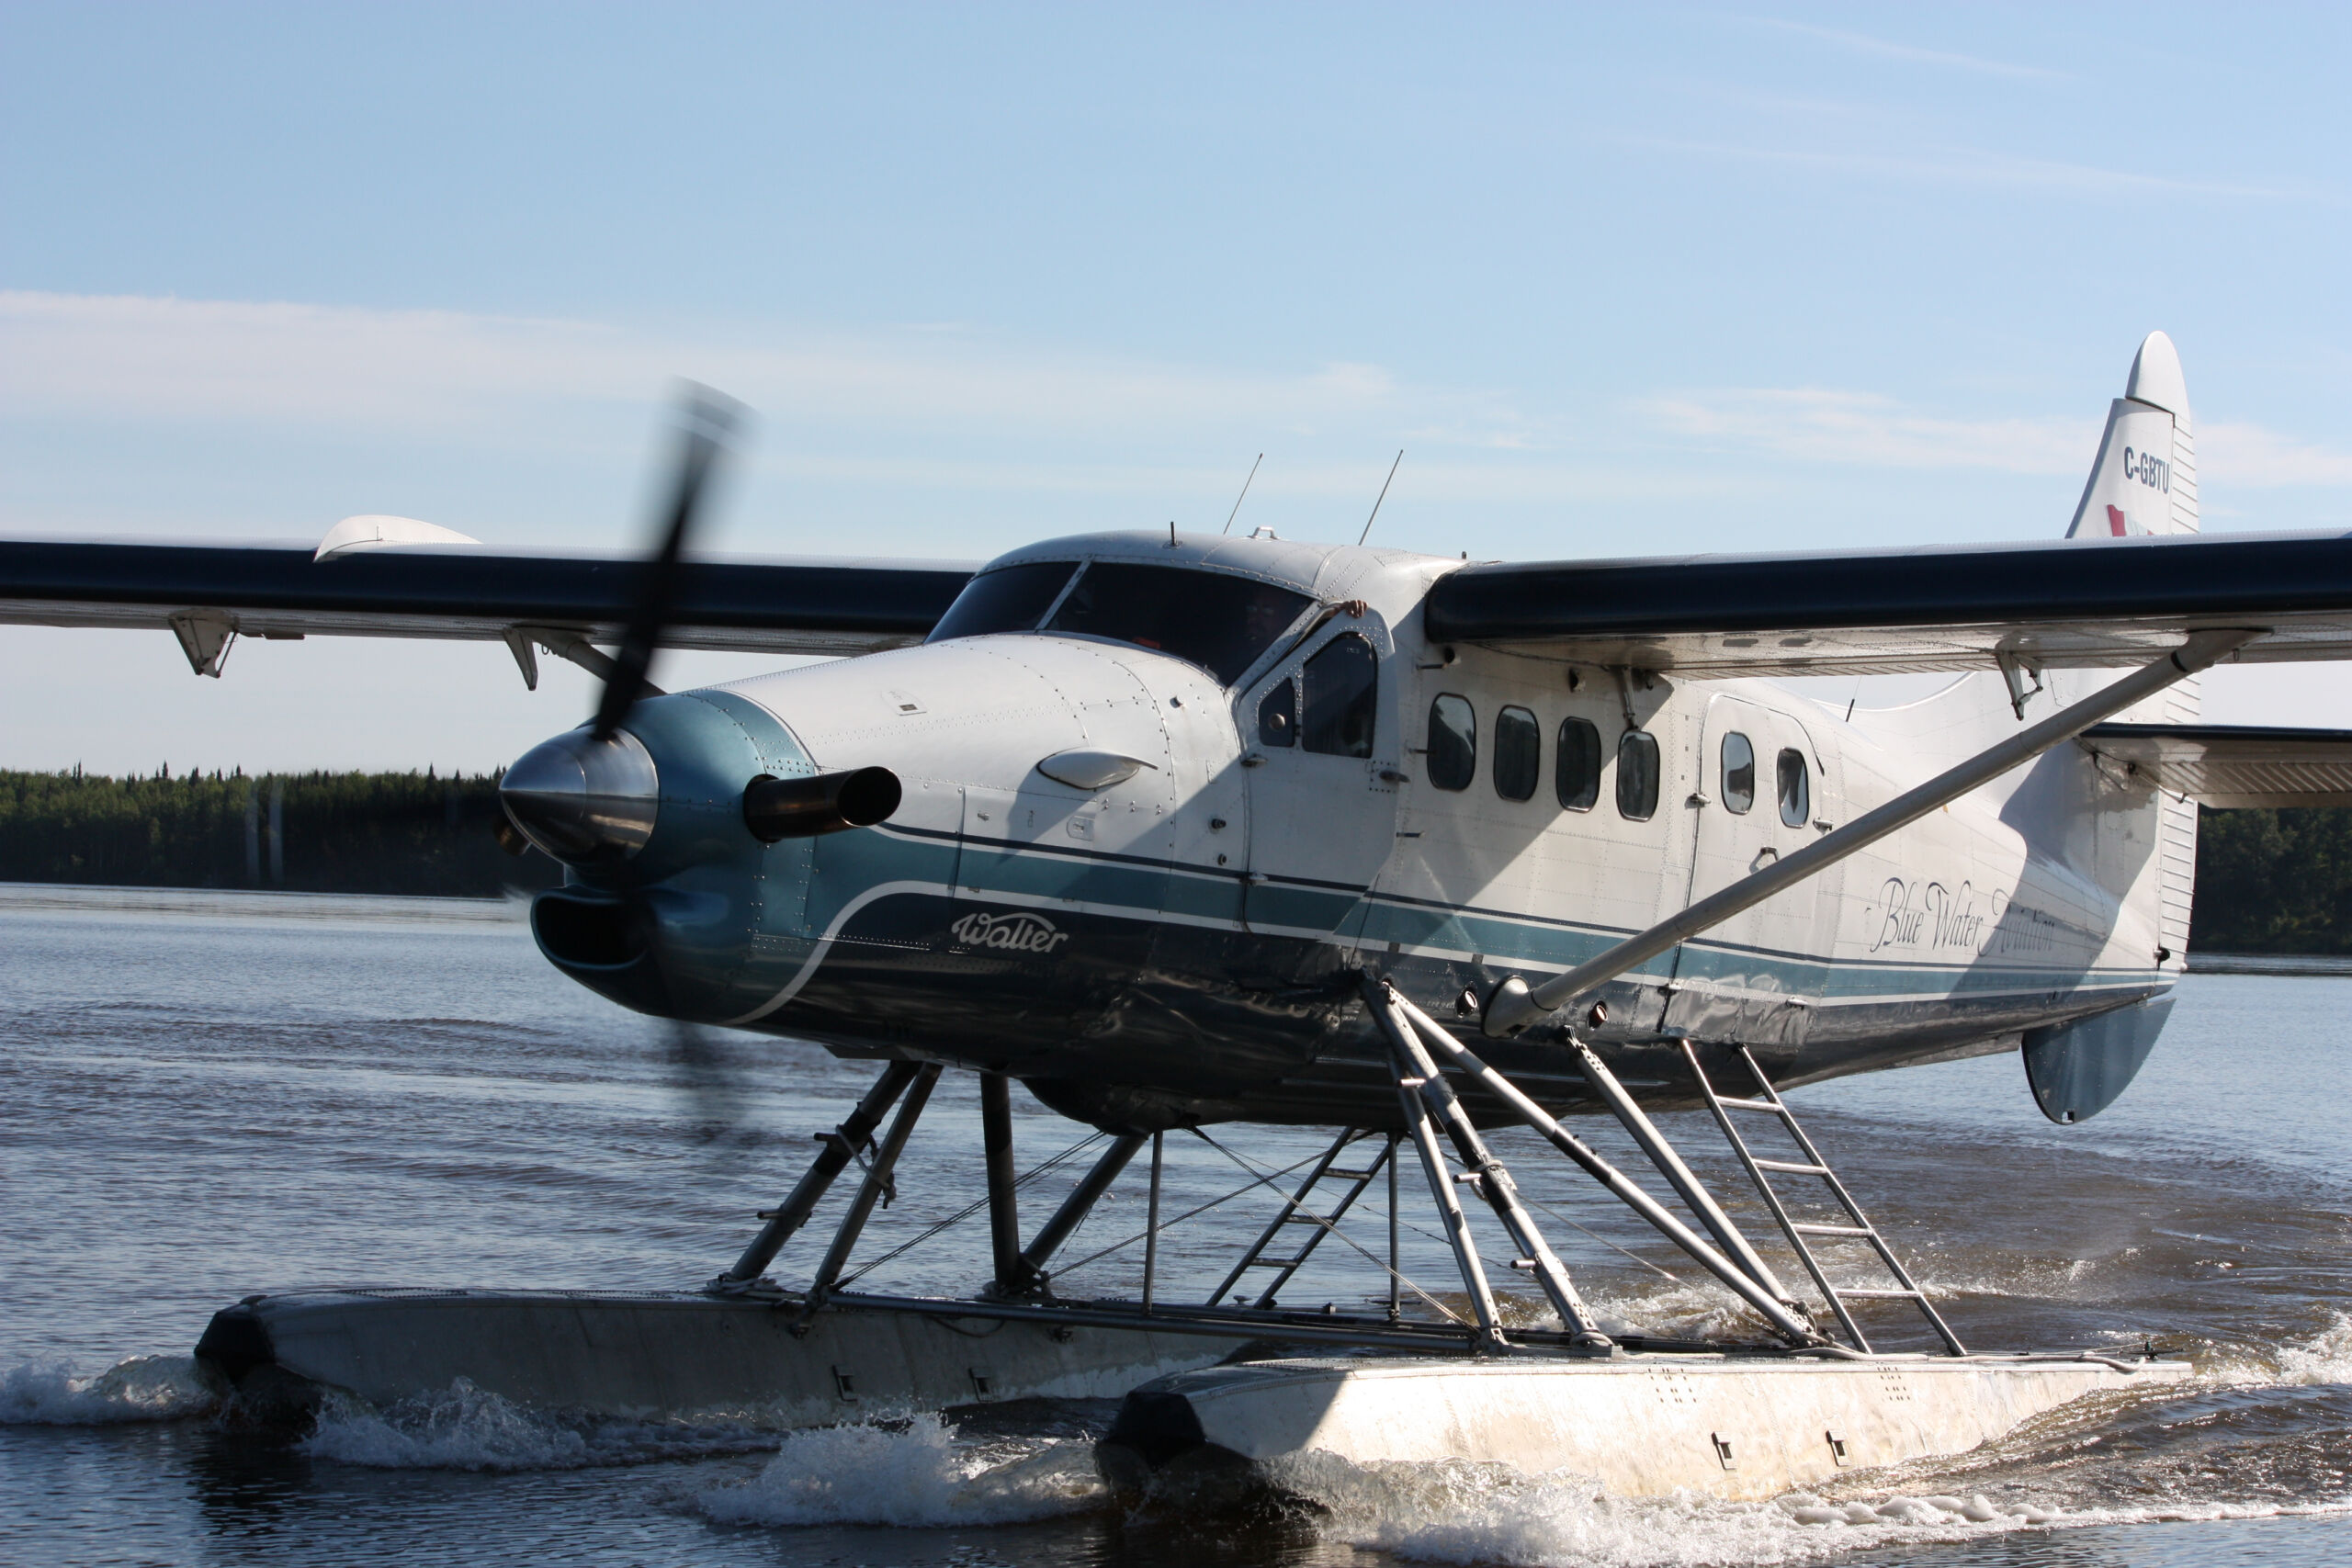 Blue Water Aviation is a family owned and operated air charter service based in Silver Falls, MB